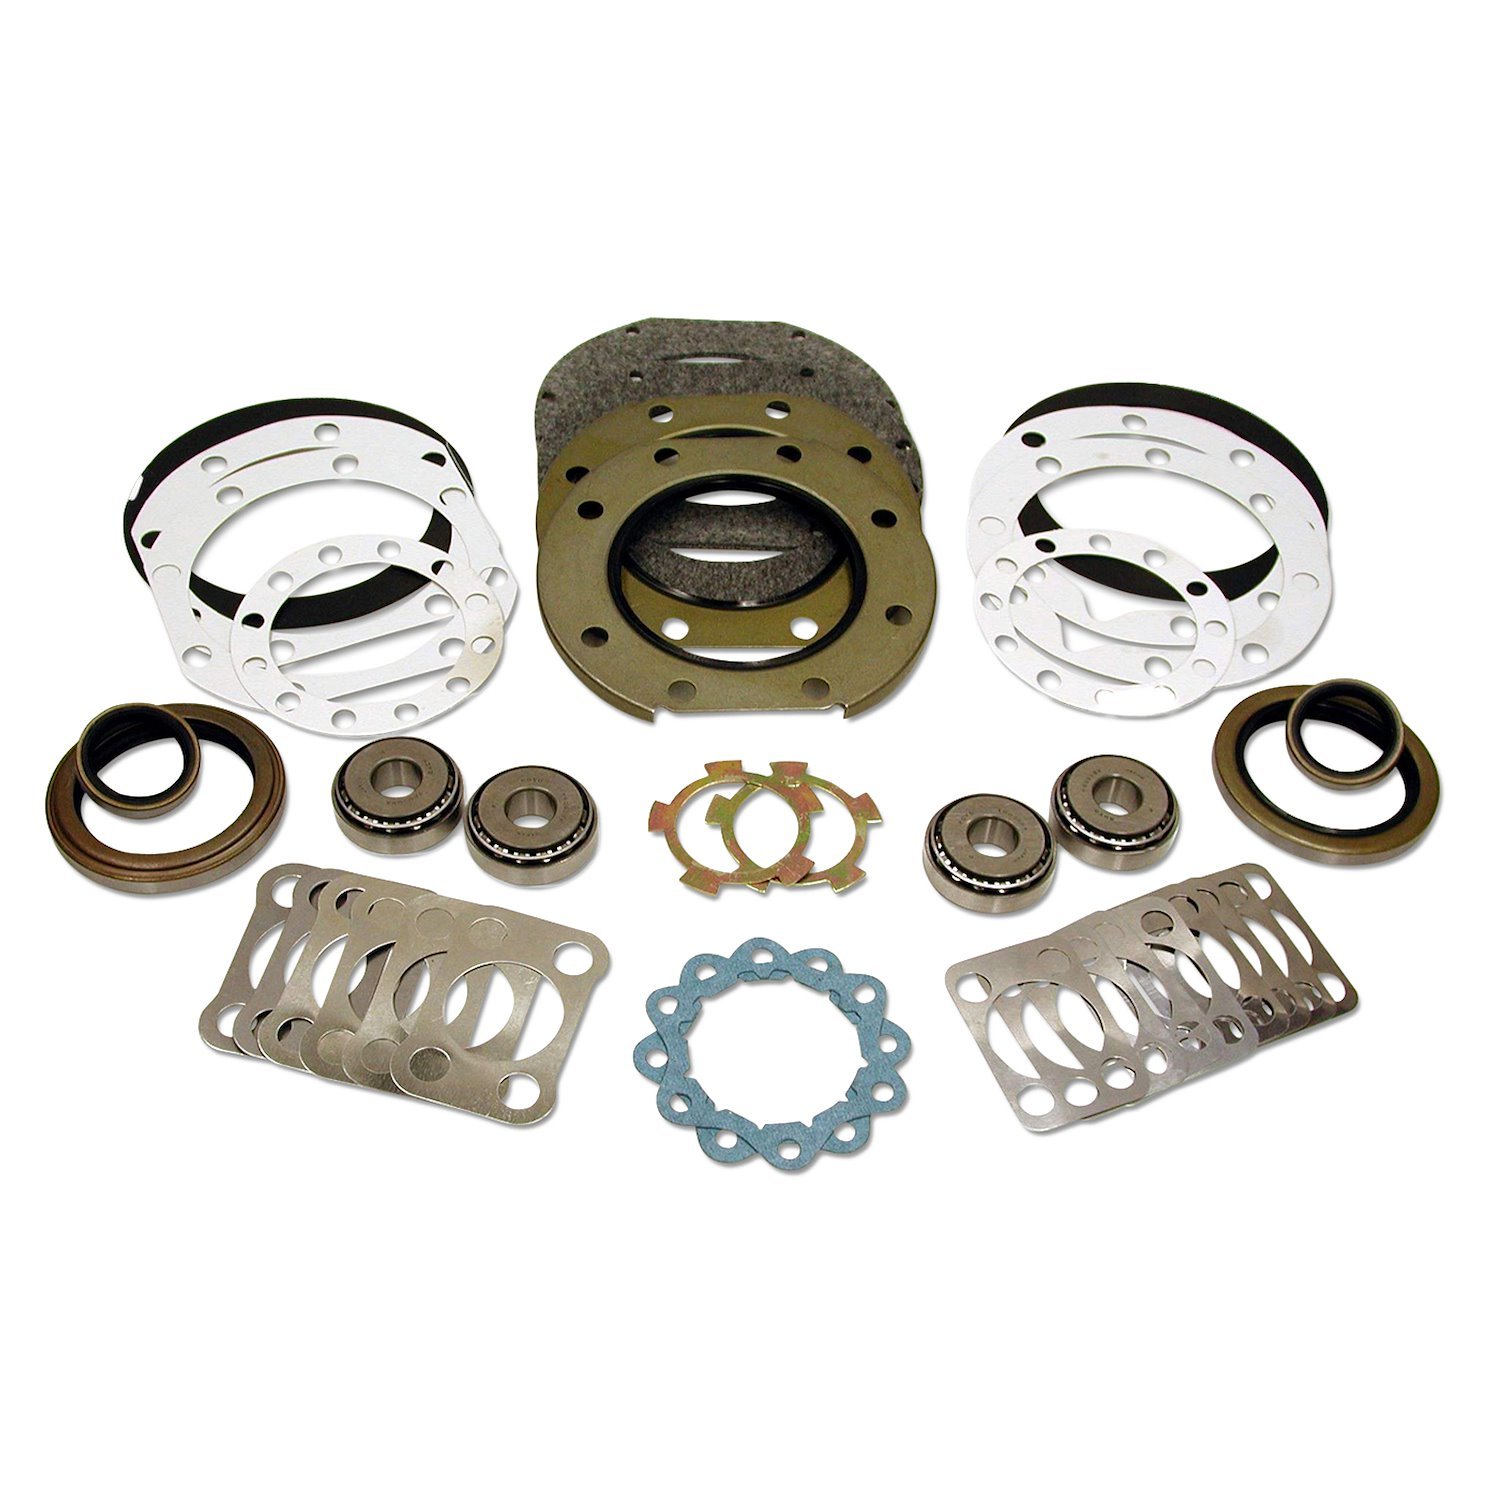 Toyota '79-'85 Hilux And '75-'90 Landcruiser Knuckle Kit